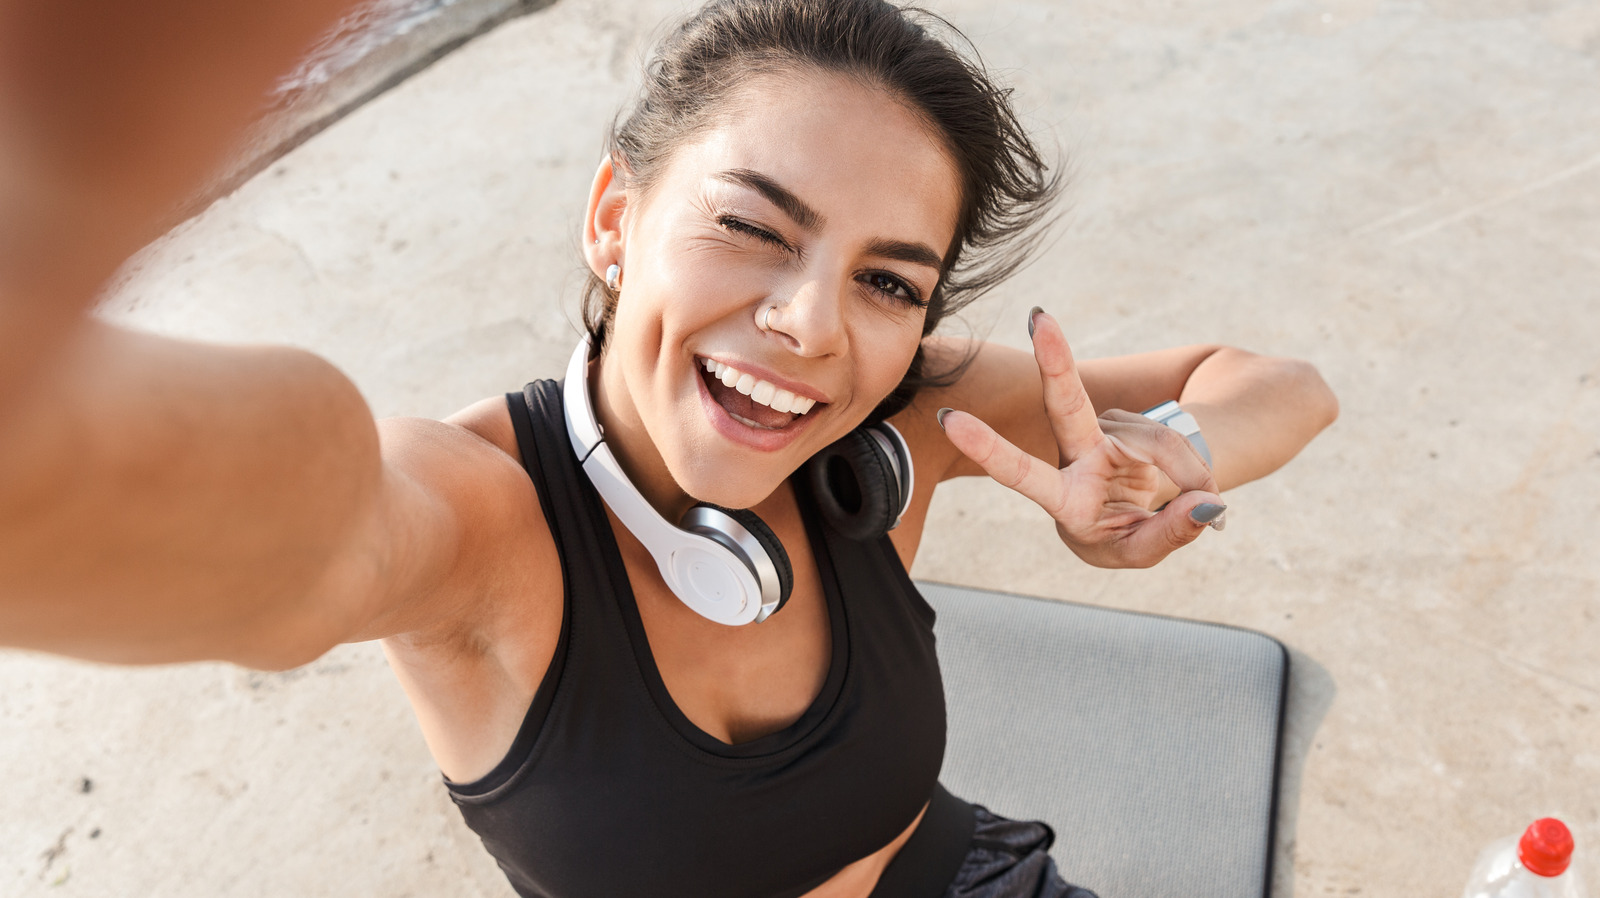 It's time to wear the best sports bra & fit for that workout you